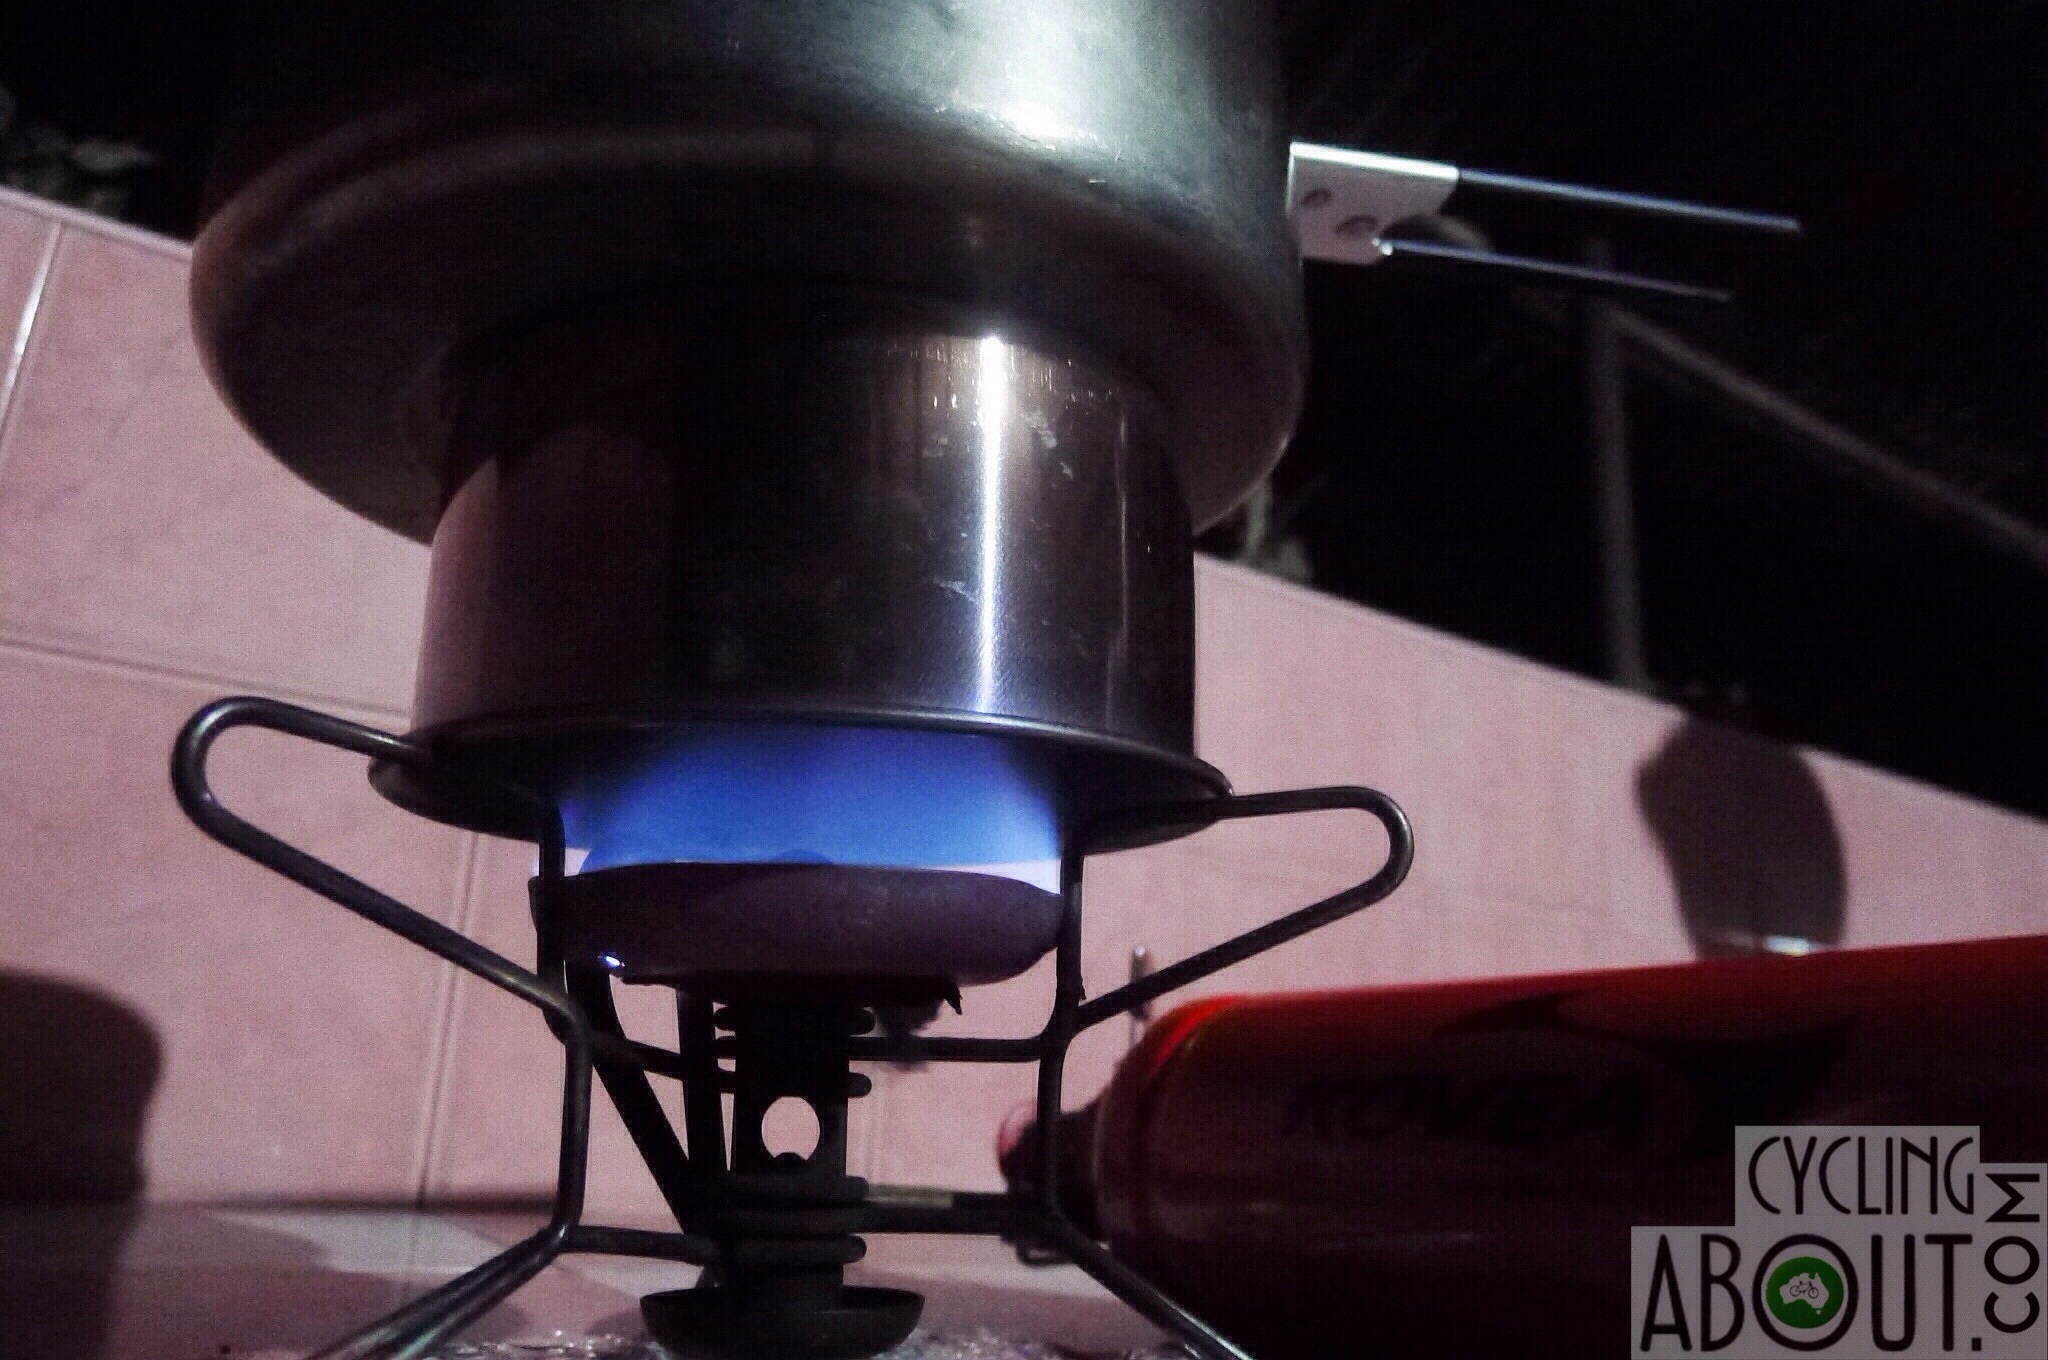 Review: MSR Whisperlite Internationale Stove - CyclingAbout.